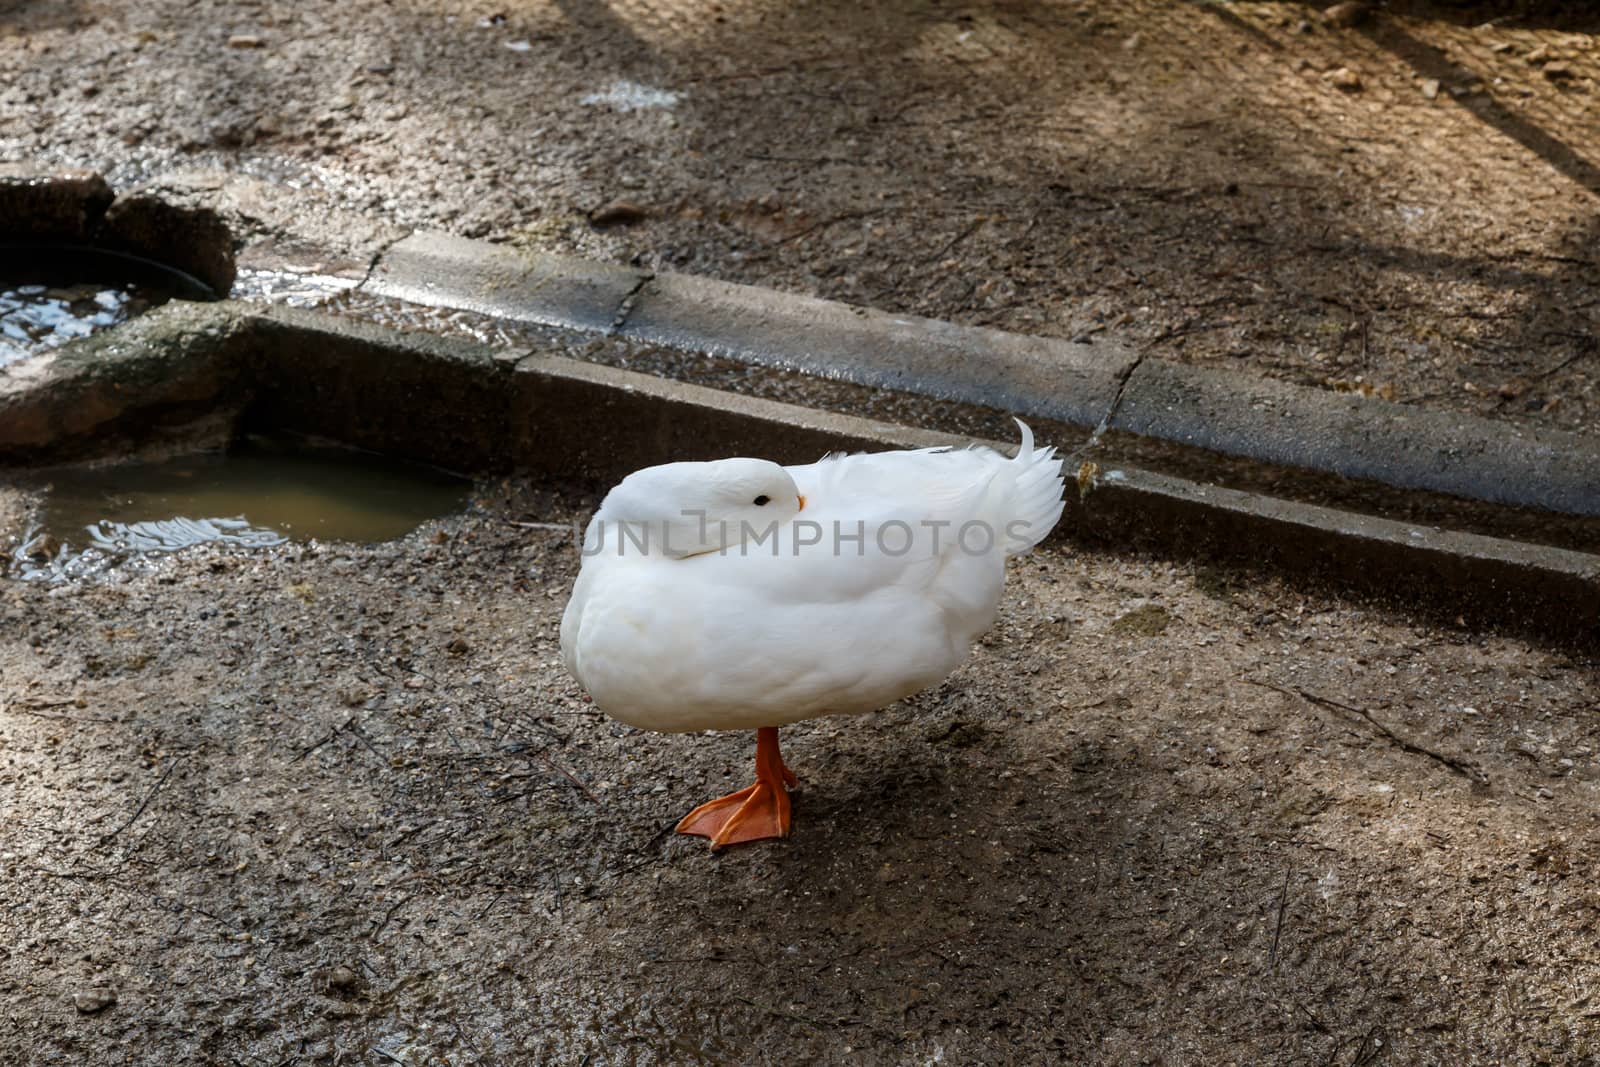 View of goose or duck in a cage on the ground.